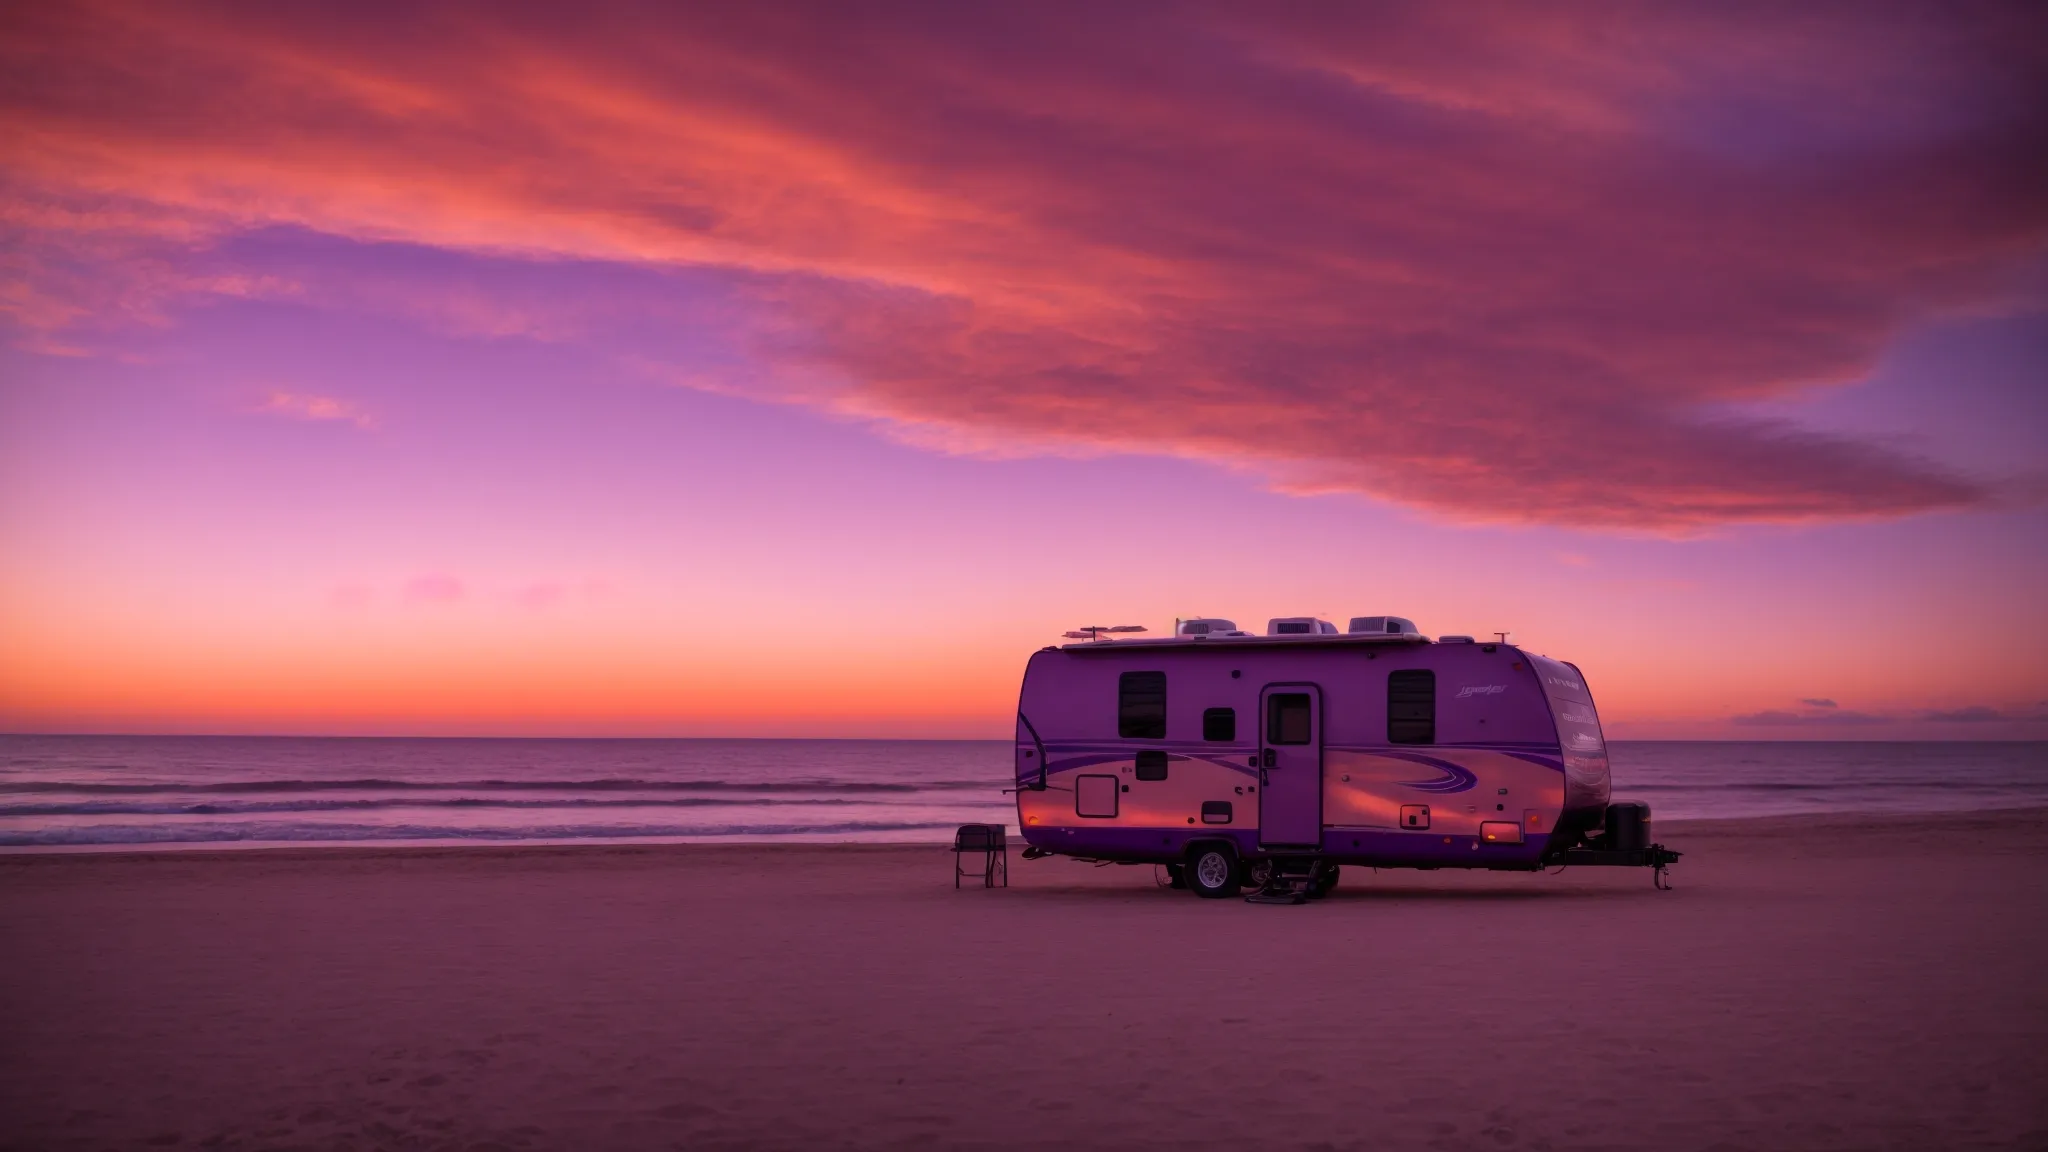 an rv parked by the serene beach with the sunset painting the sky in hues of orange and purple.